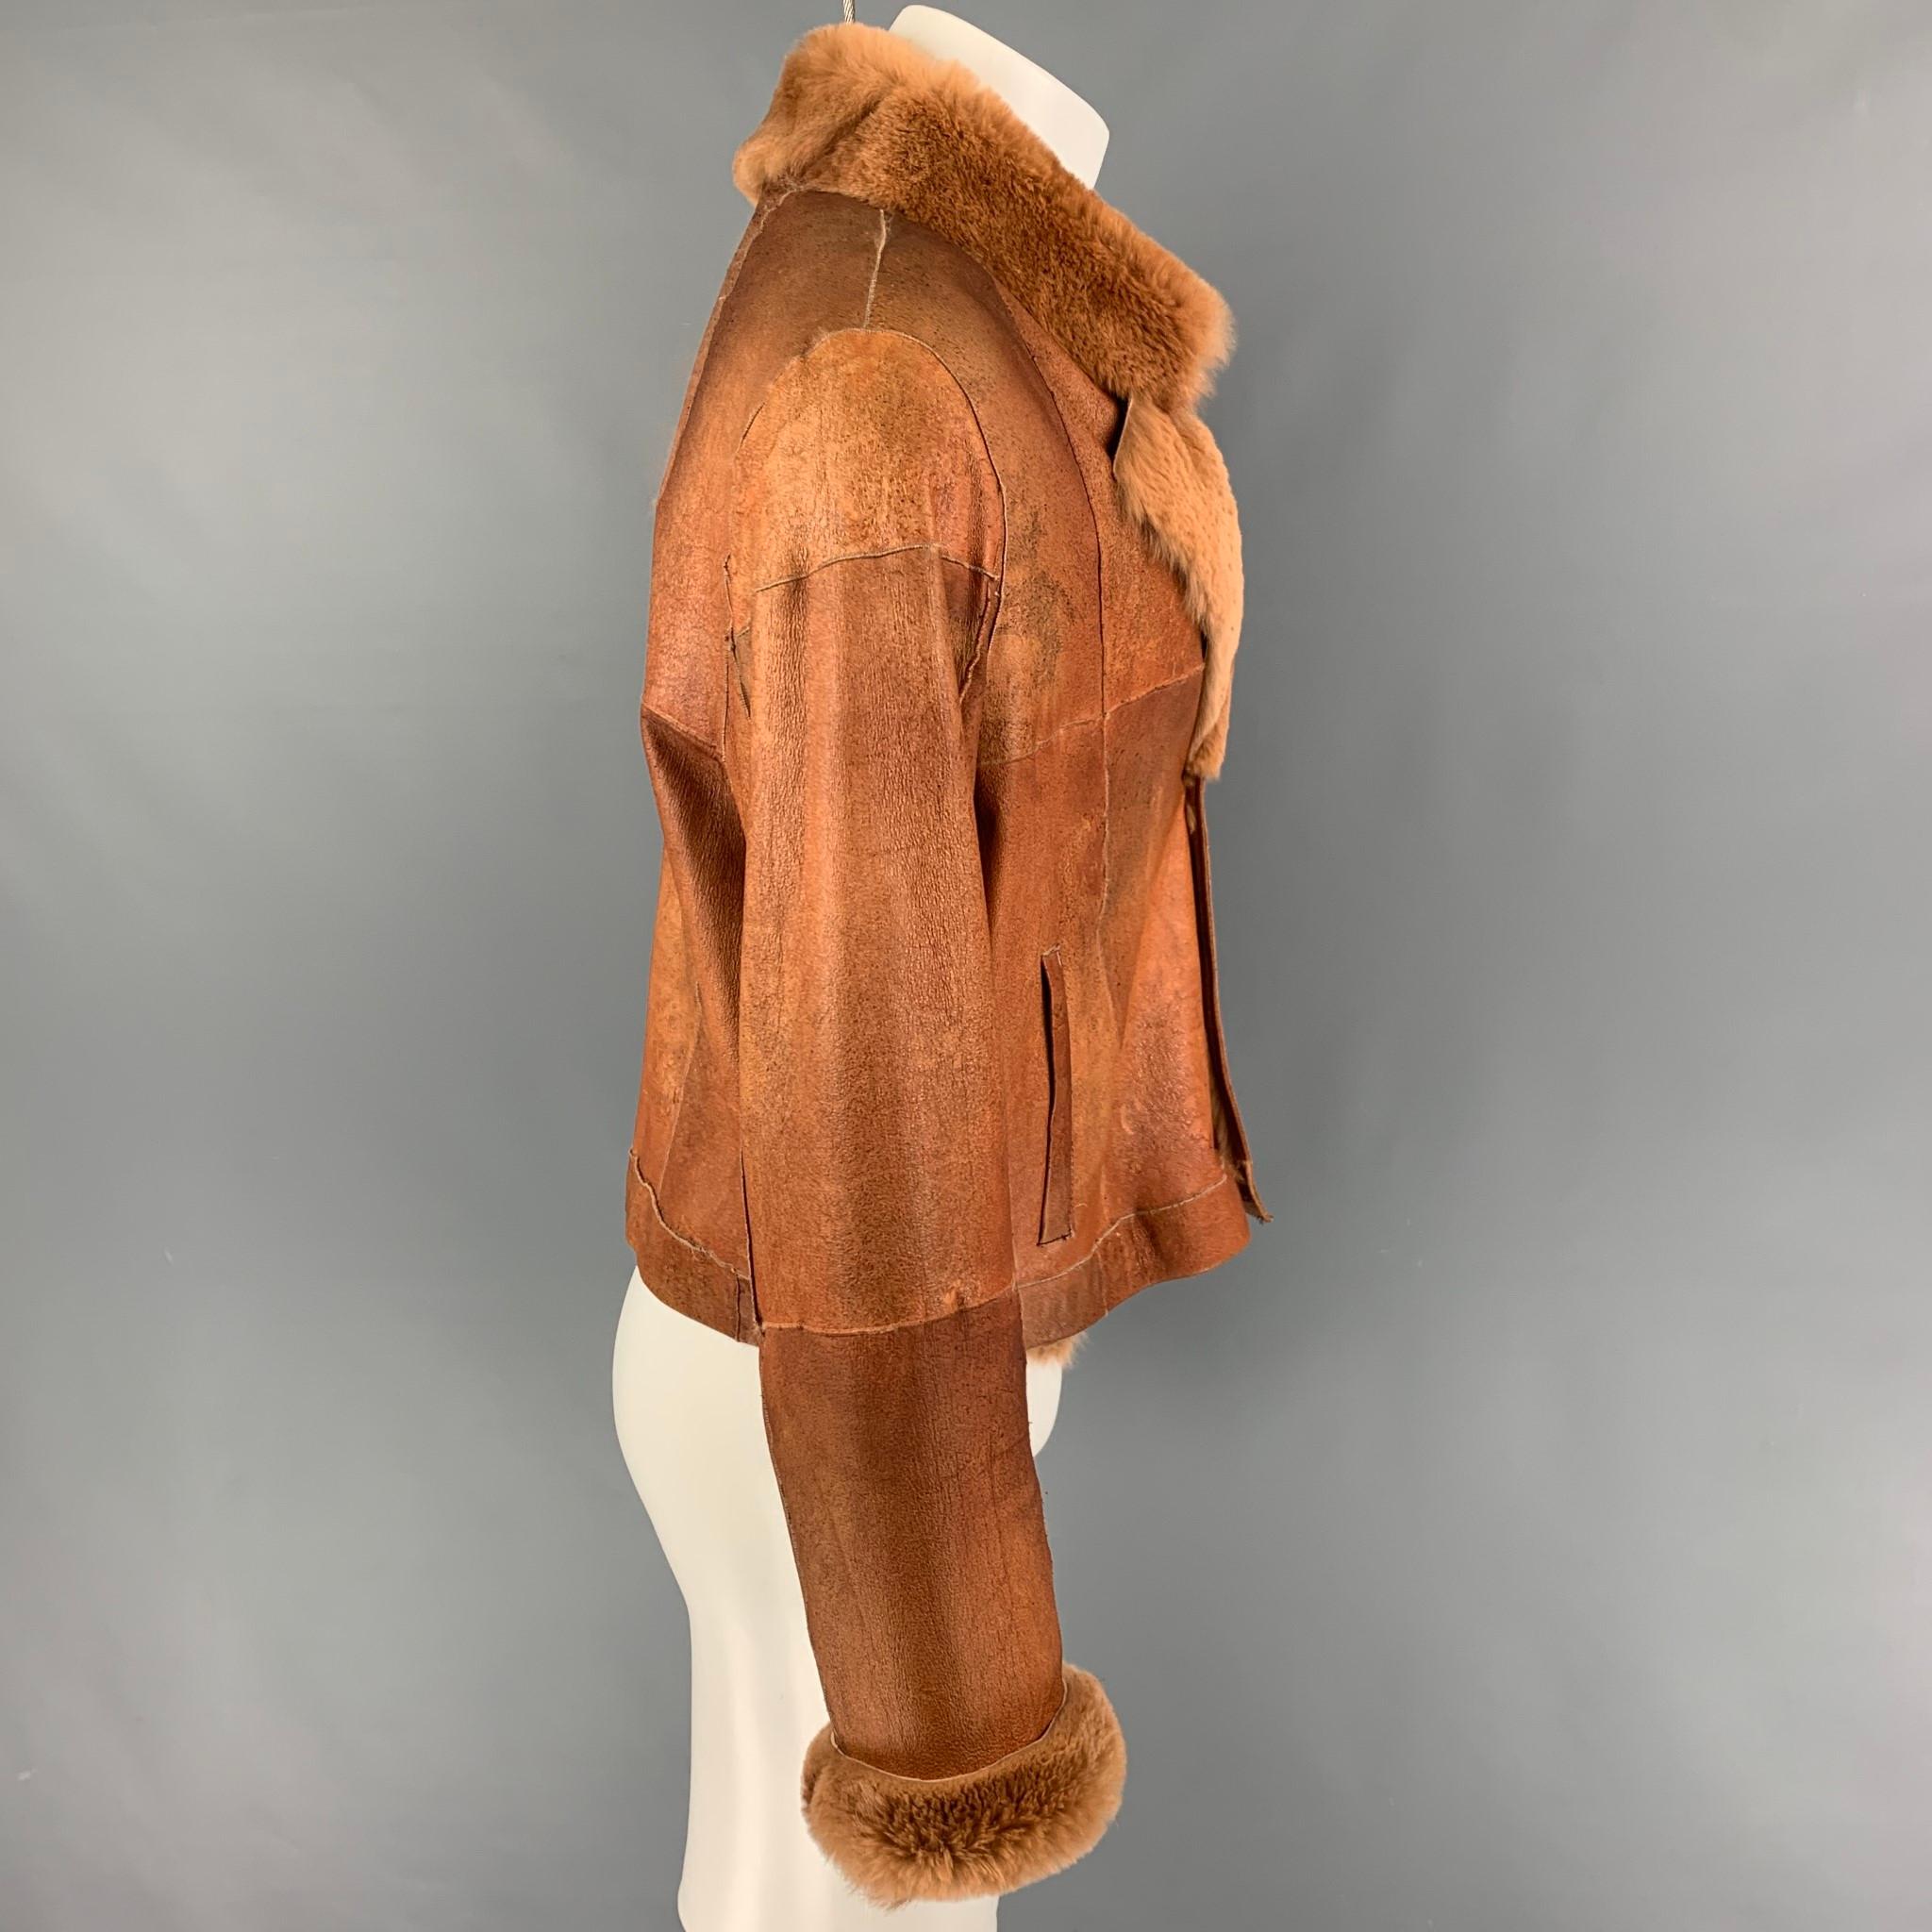 VINTAGE jacket comes in a tan distressed leather with a shearling interior featuring a cropped style, slit pockets, and a buttoned closure. 

Good Pre-Owned Condition. Fabric tag removed.
Marked: Size tag removed.

Measurements:

Shoulder: 19